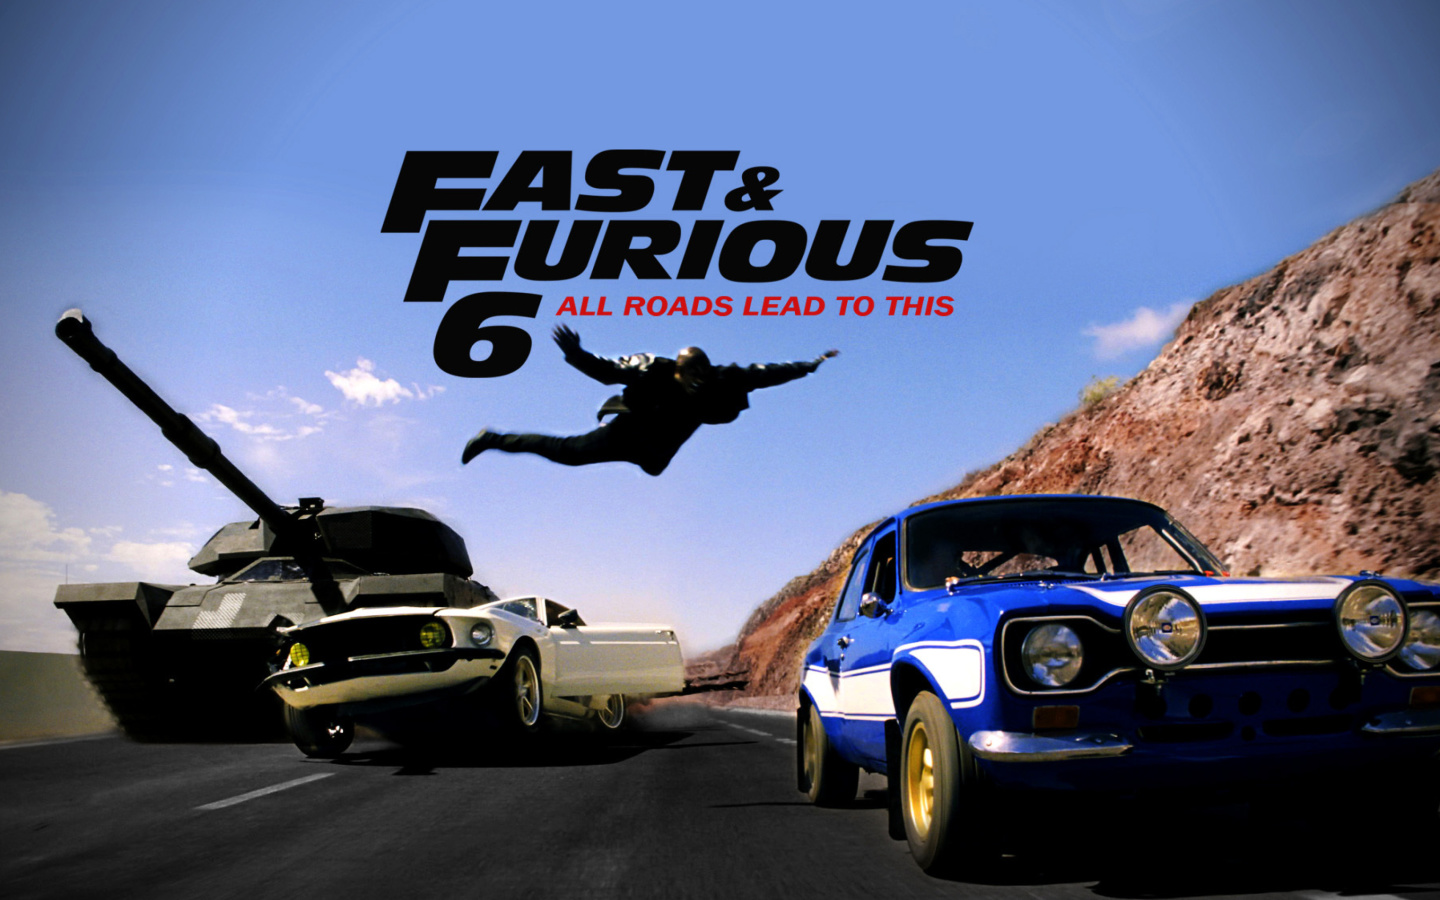 Fast and furious 6 Trailer wallpaper 1440x900